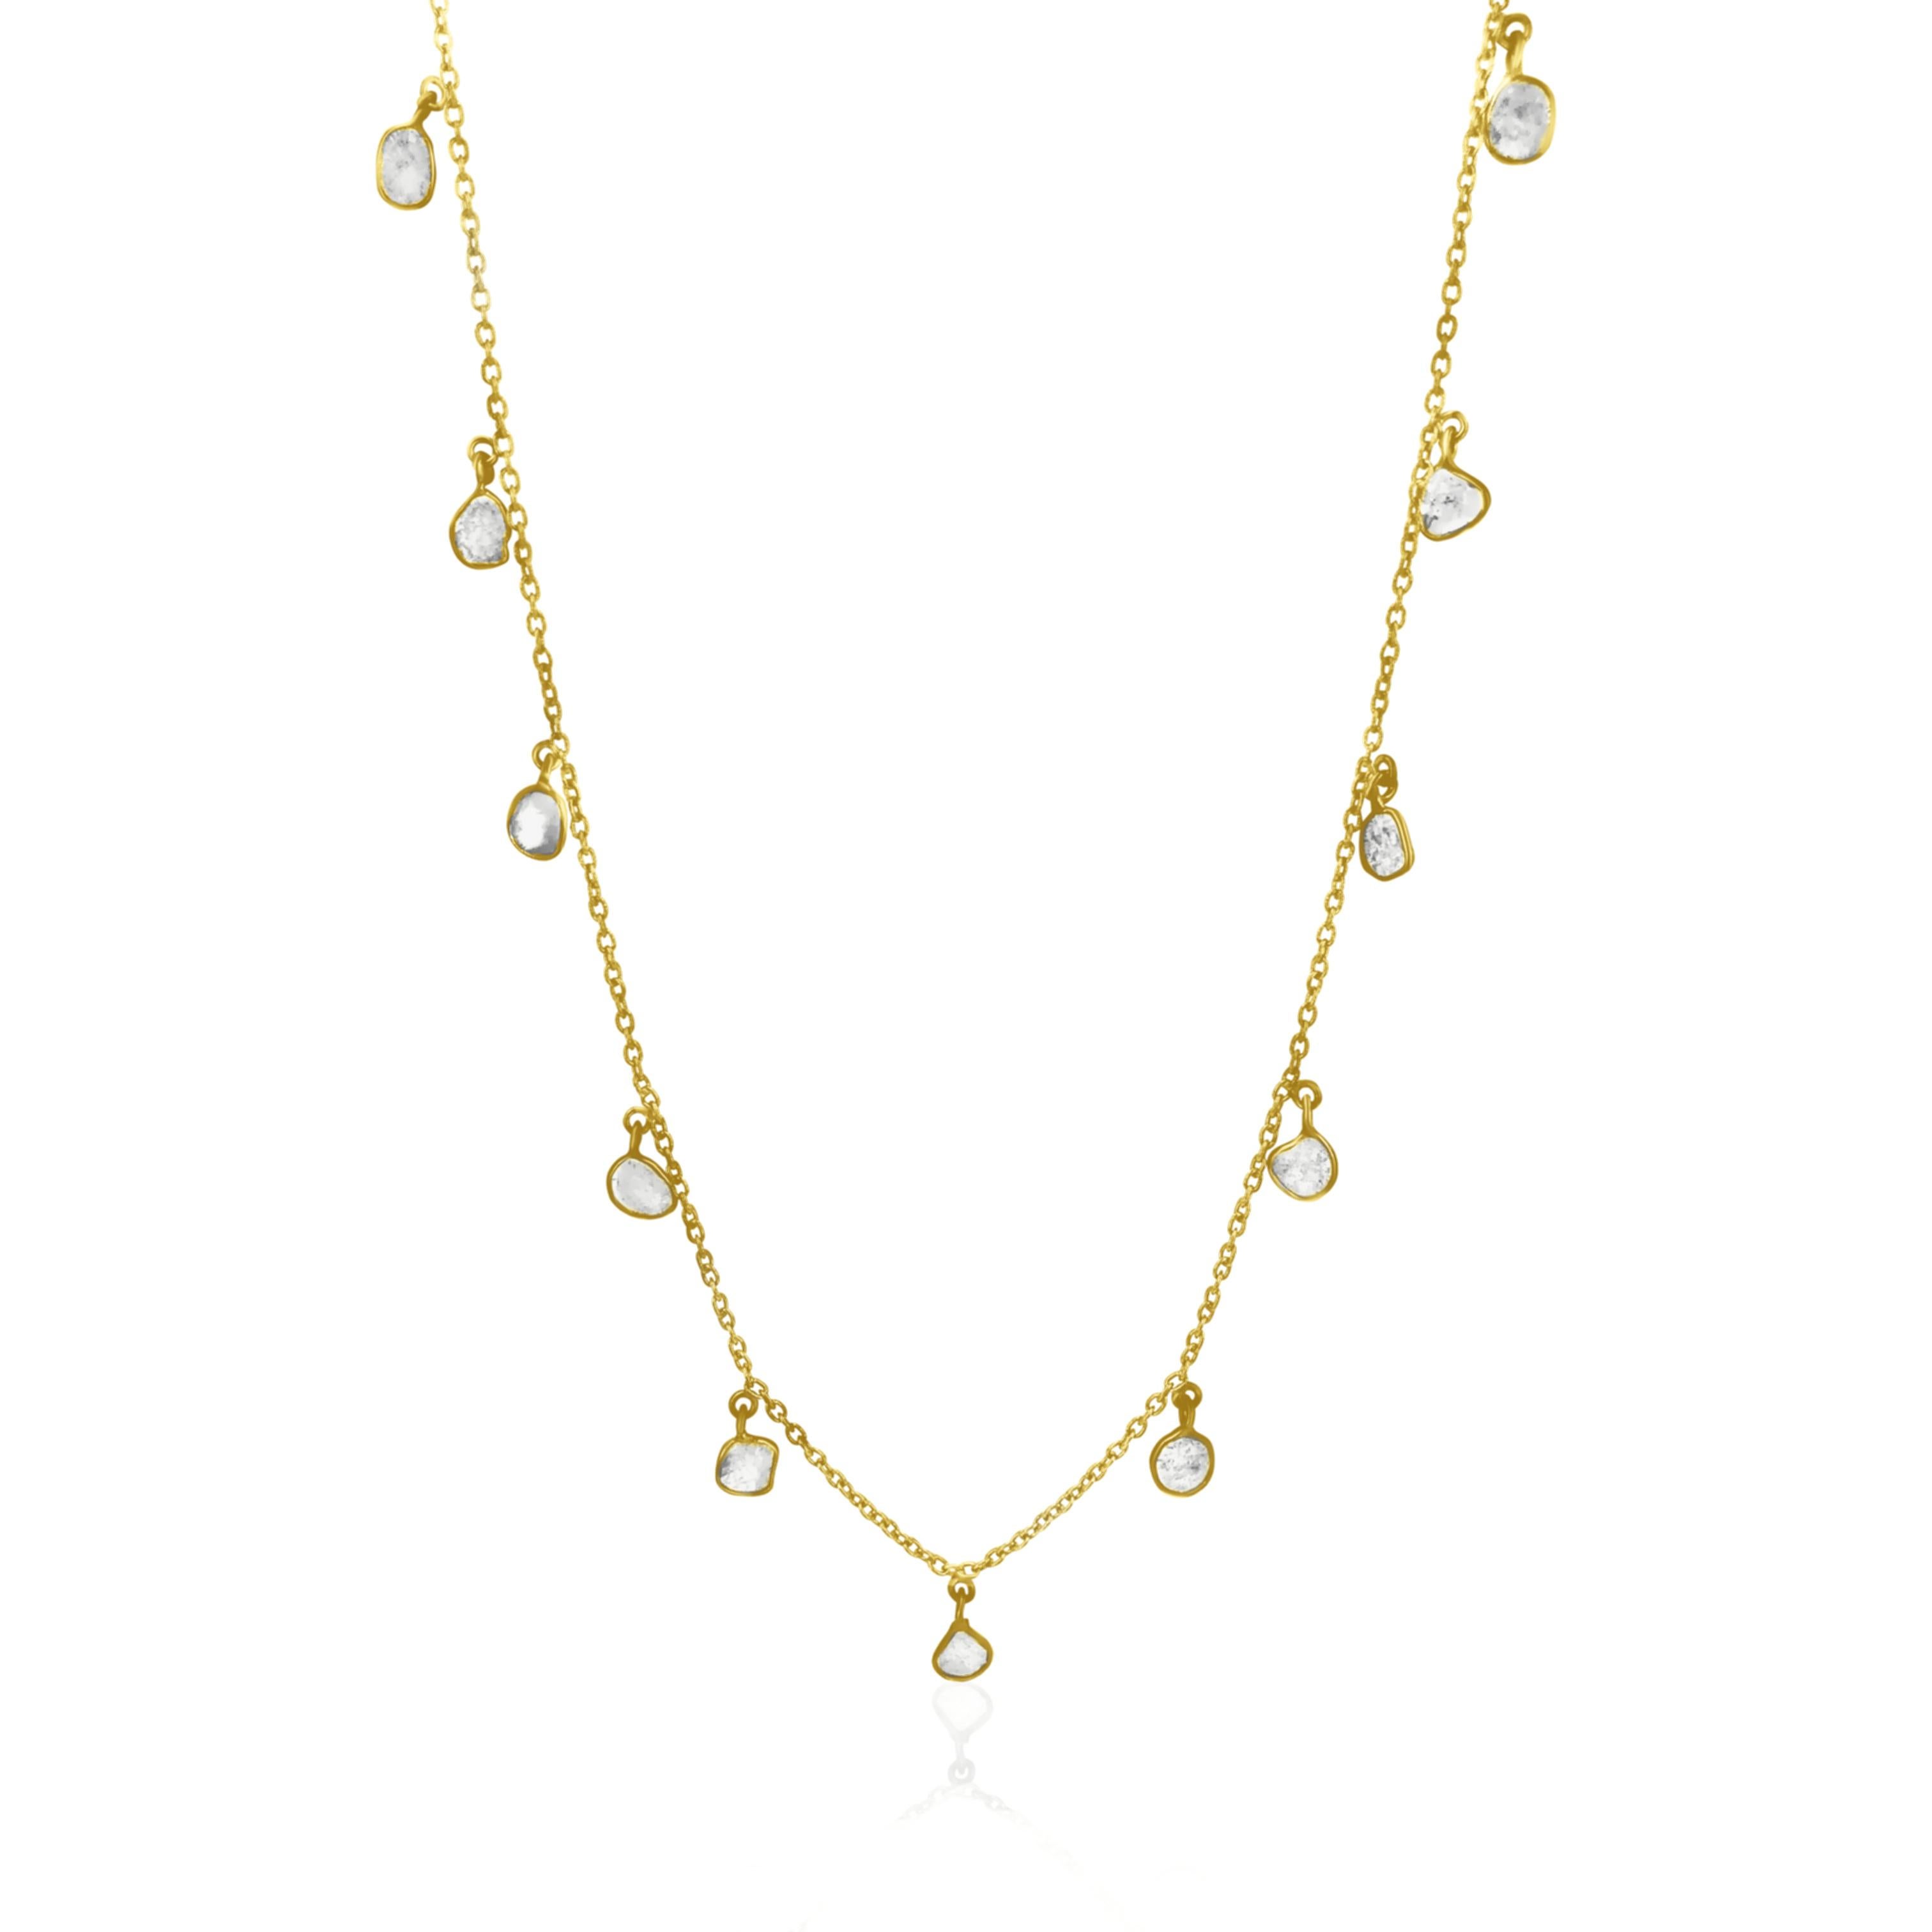 Rock & Divine Mini Lily Pad Dangles Diamond Necklace in 18K Yellow Gold

PRIMARY DETAILS
SKU: 102462
Listing Title: Rock & Divine Mini Lily Pad Dangles Diamond Necklace in 18K Yellow Gold
Condition Description: Retails for 2420 USD. In excellent